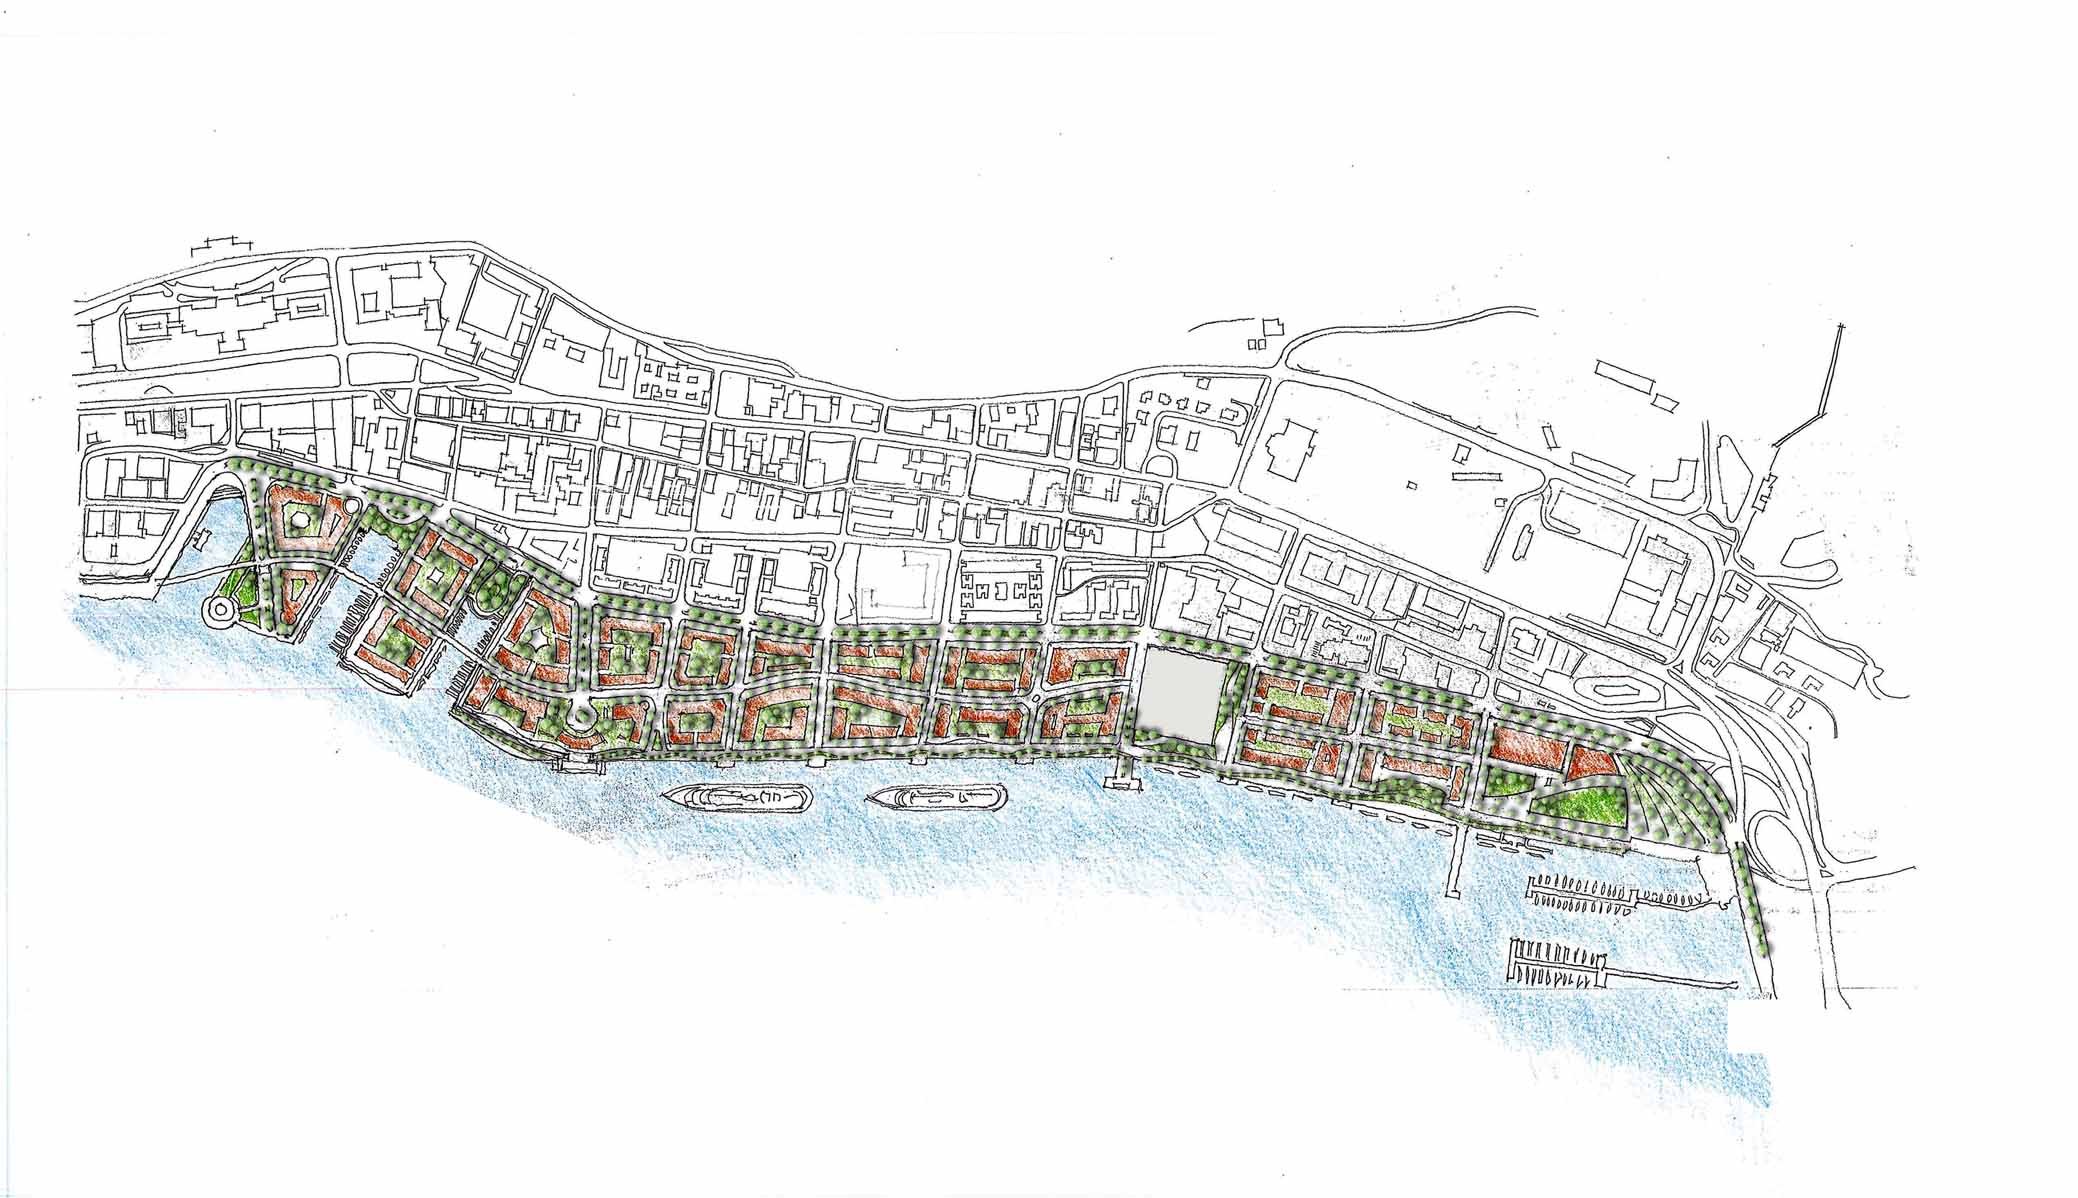  Waterfront Project master plan. 